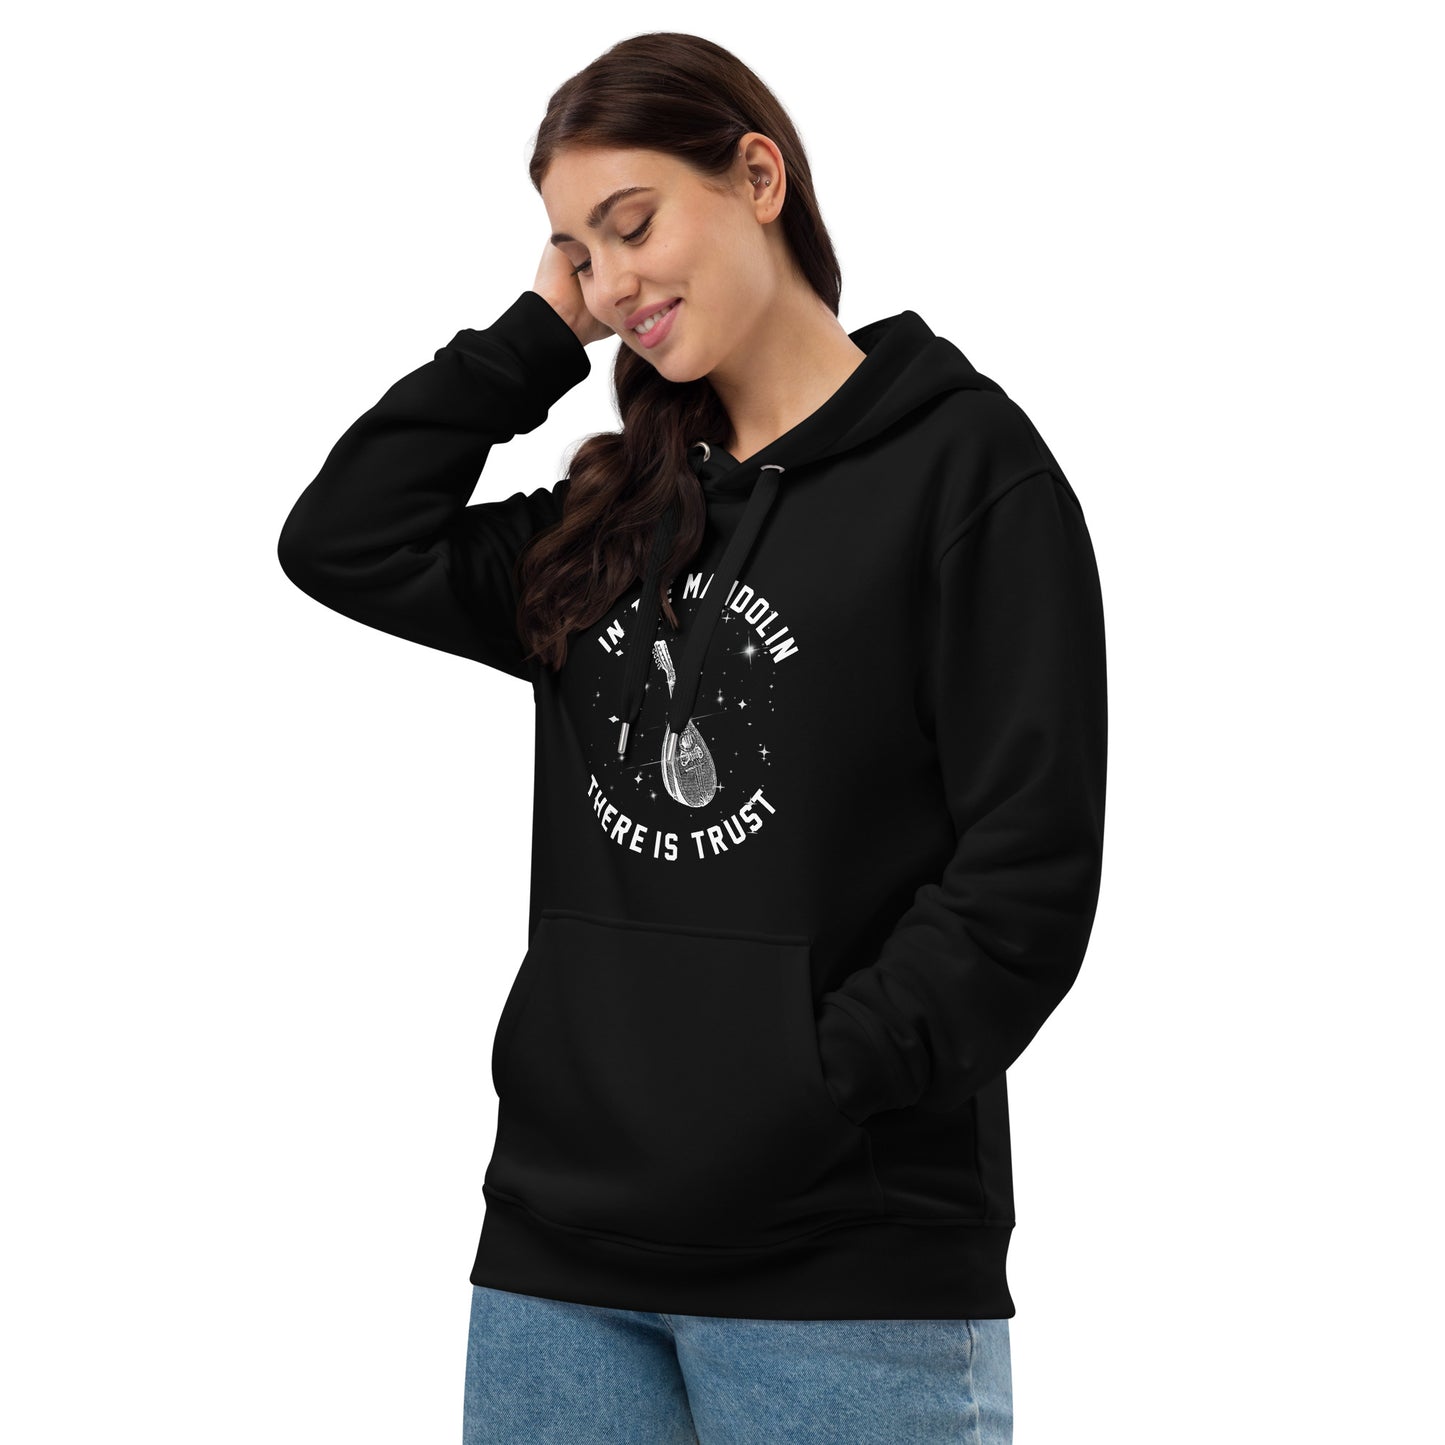 In the Mandolin There is Trust Original Hoodie